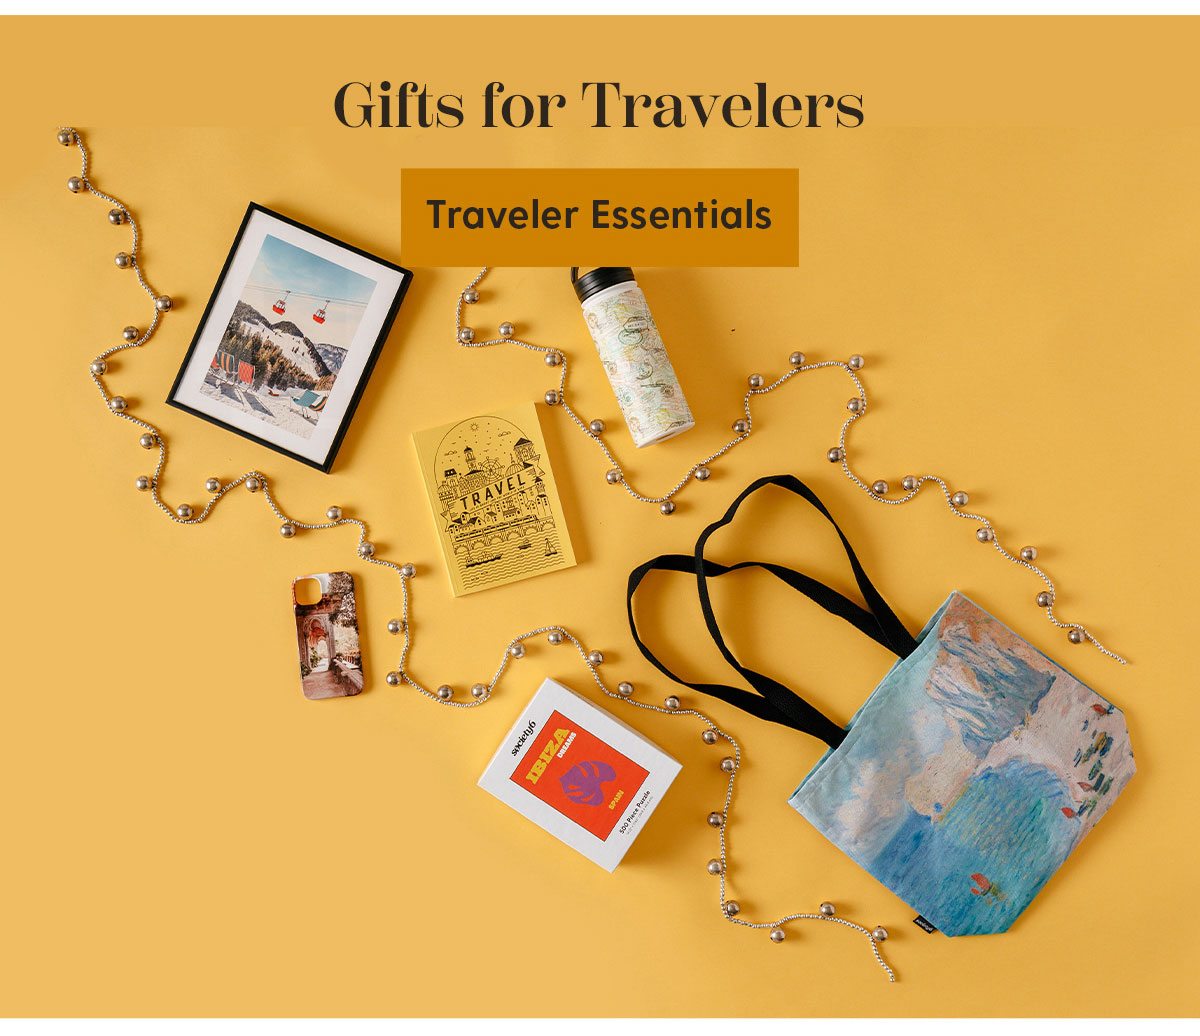 Gifts for Travelers | Traveler Essentials